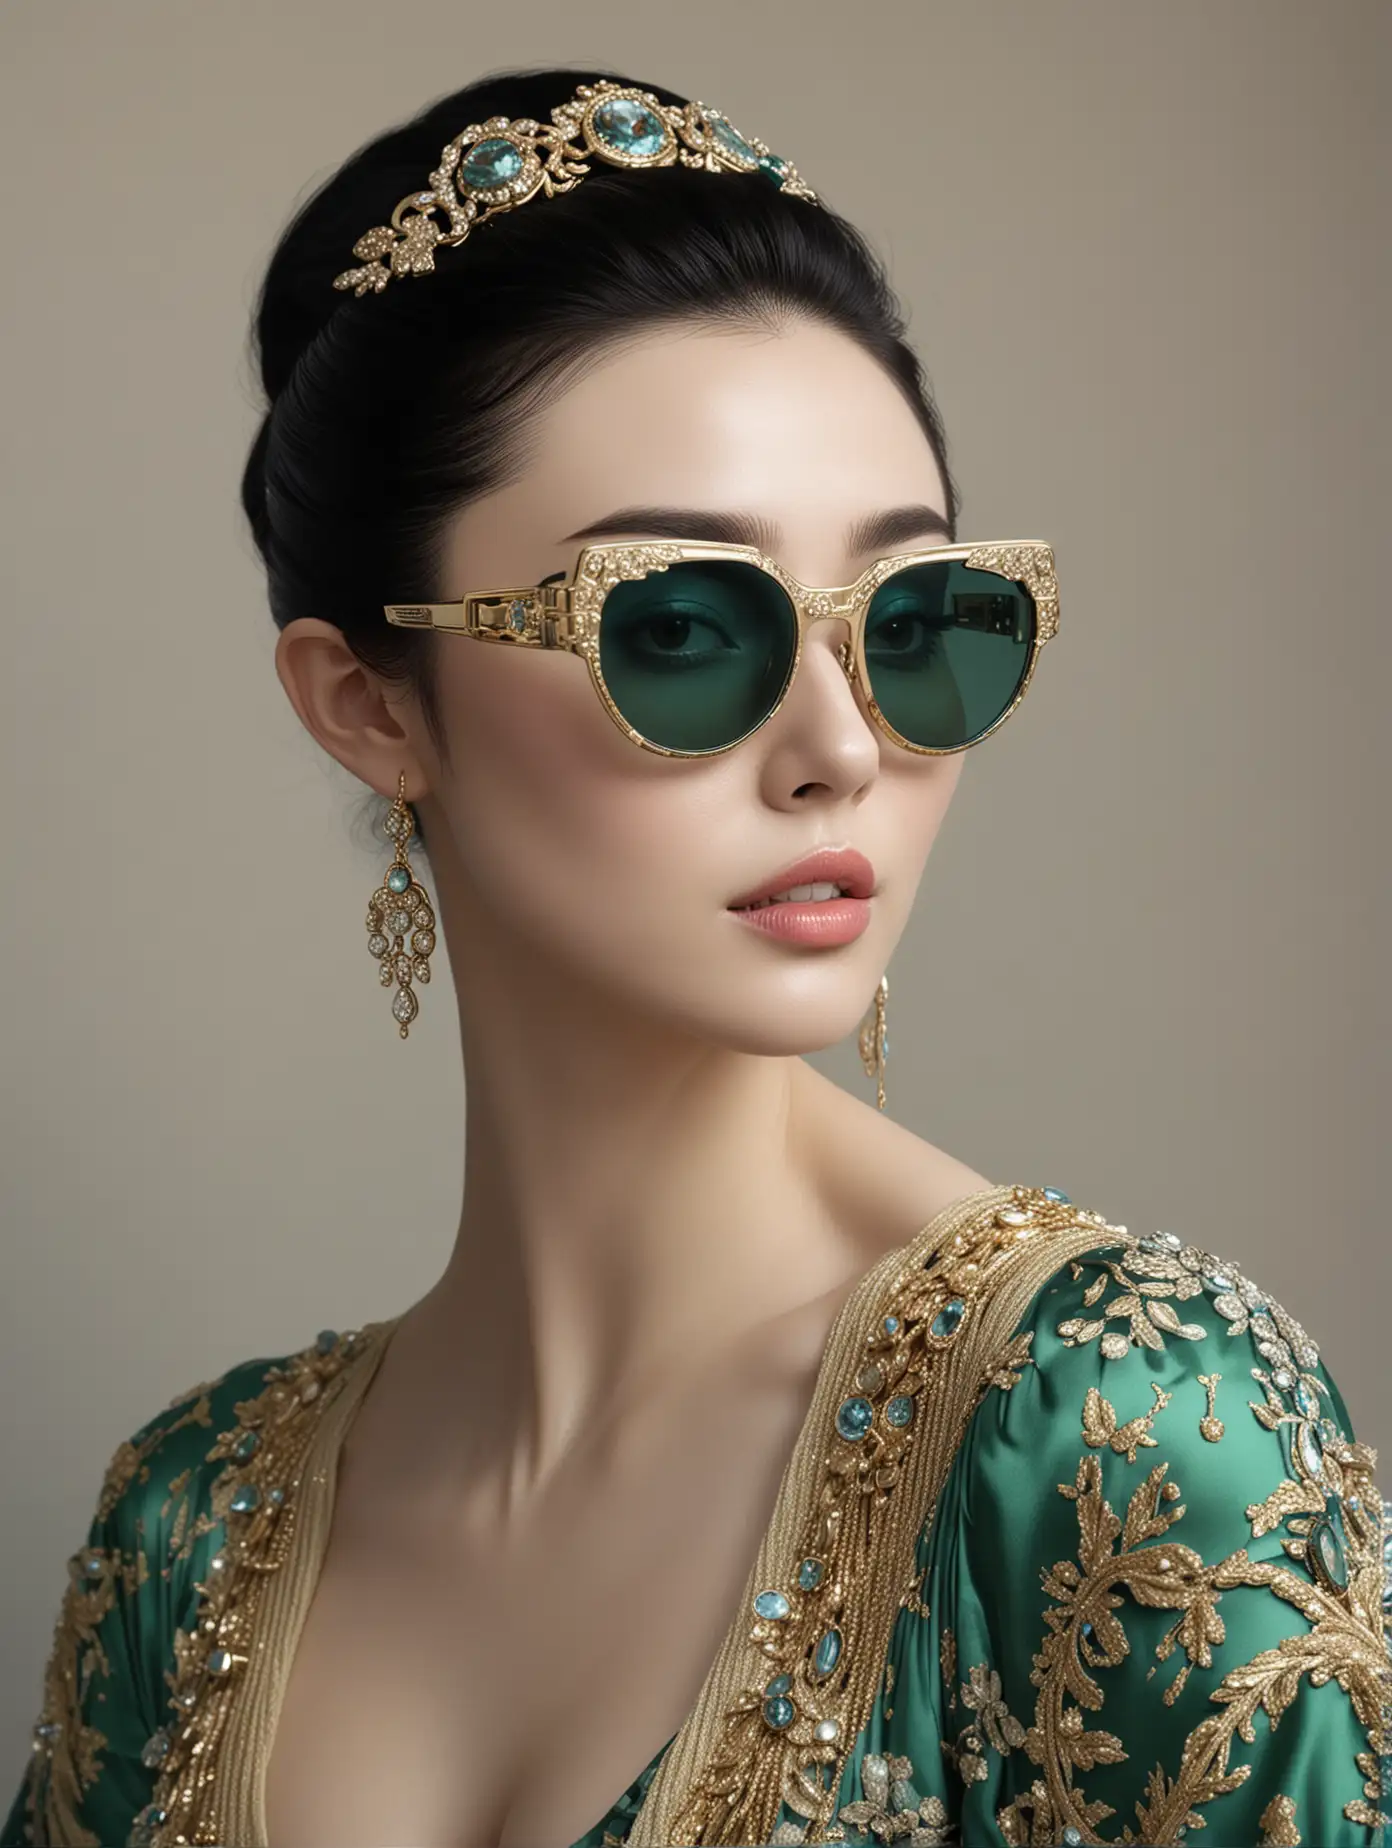 Fan bingbing  High fashion inspired by Gucci, Aurora Australis sunglasses, Wearable tech, a photorealistic painting by Silvia Dimitrova, featured on cg society, neoclassicism, behance hd, studio photography, studio portrait